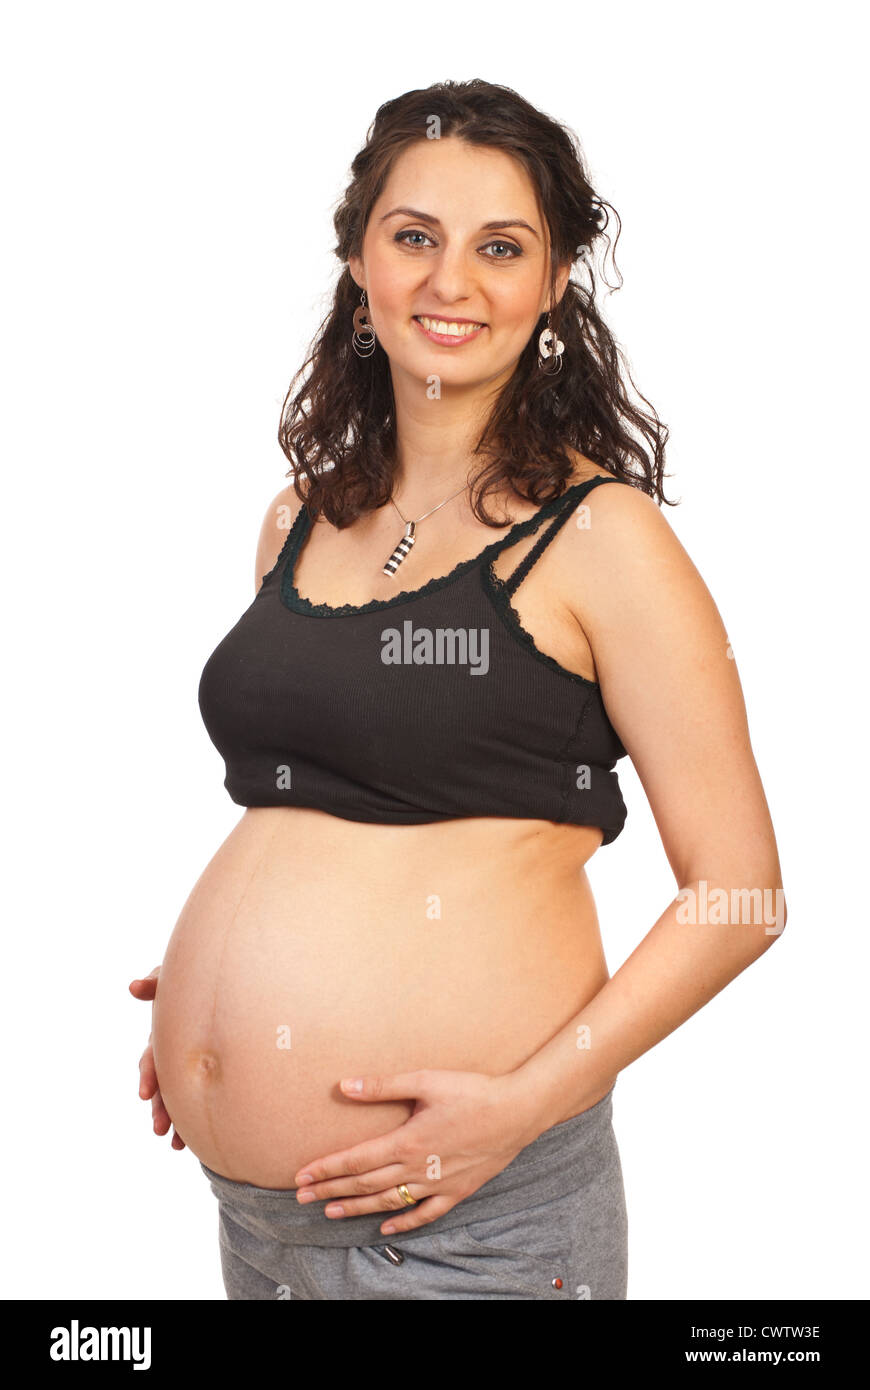 Laughing pregnant woman showing her nine months belly isolated on white background Stock Photo